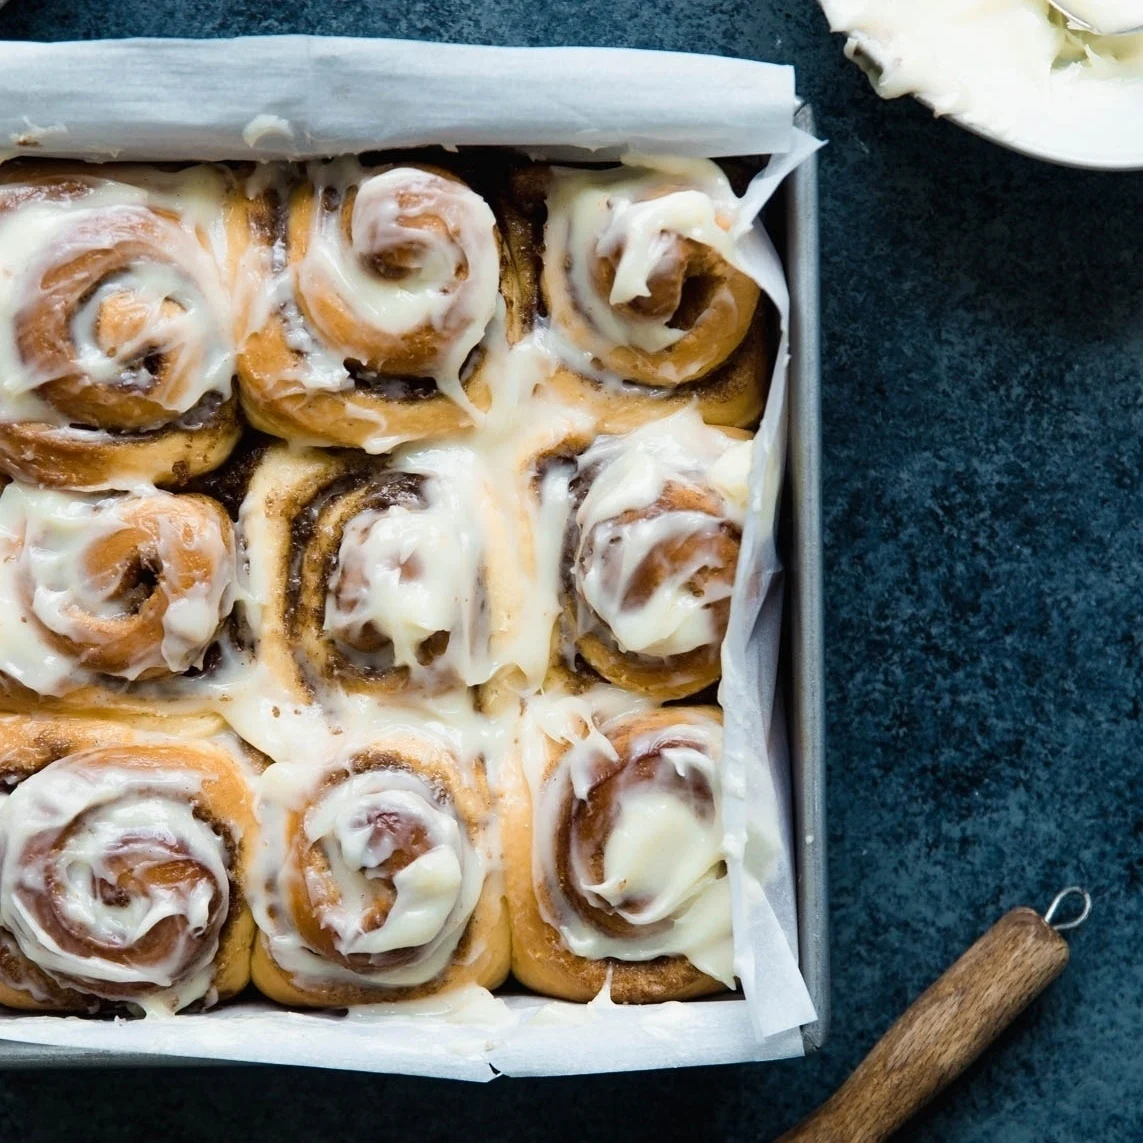 What Is The Difference Between A Chelsea Bun And A Cinnamon Bun? photo